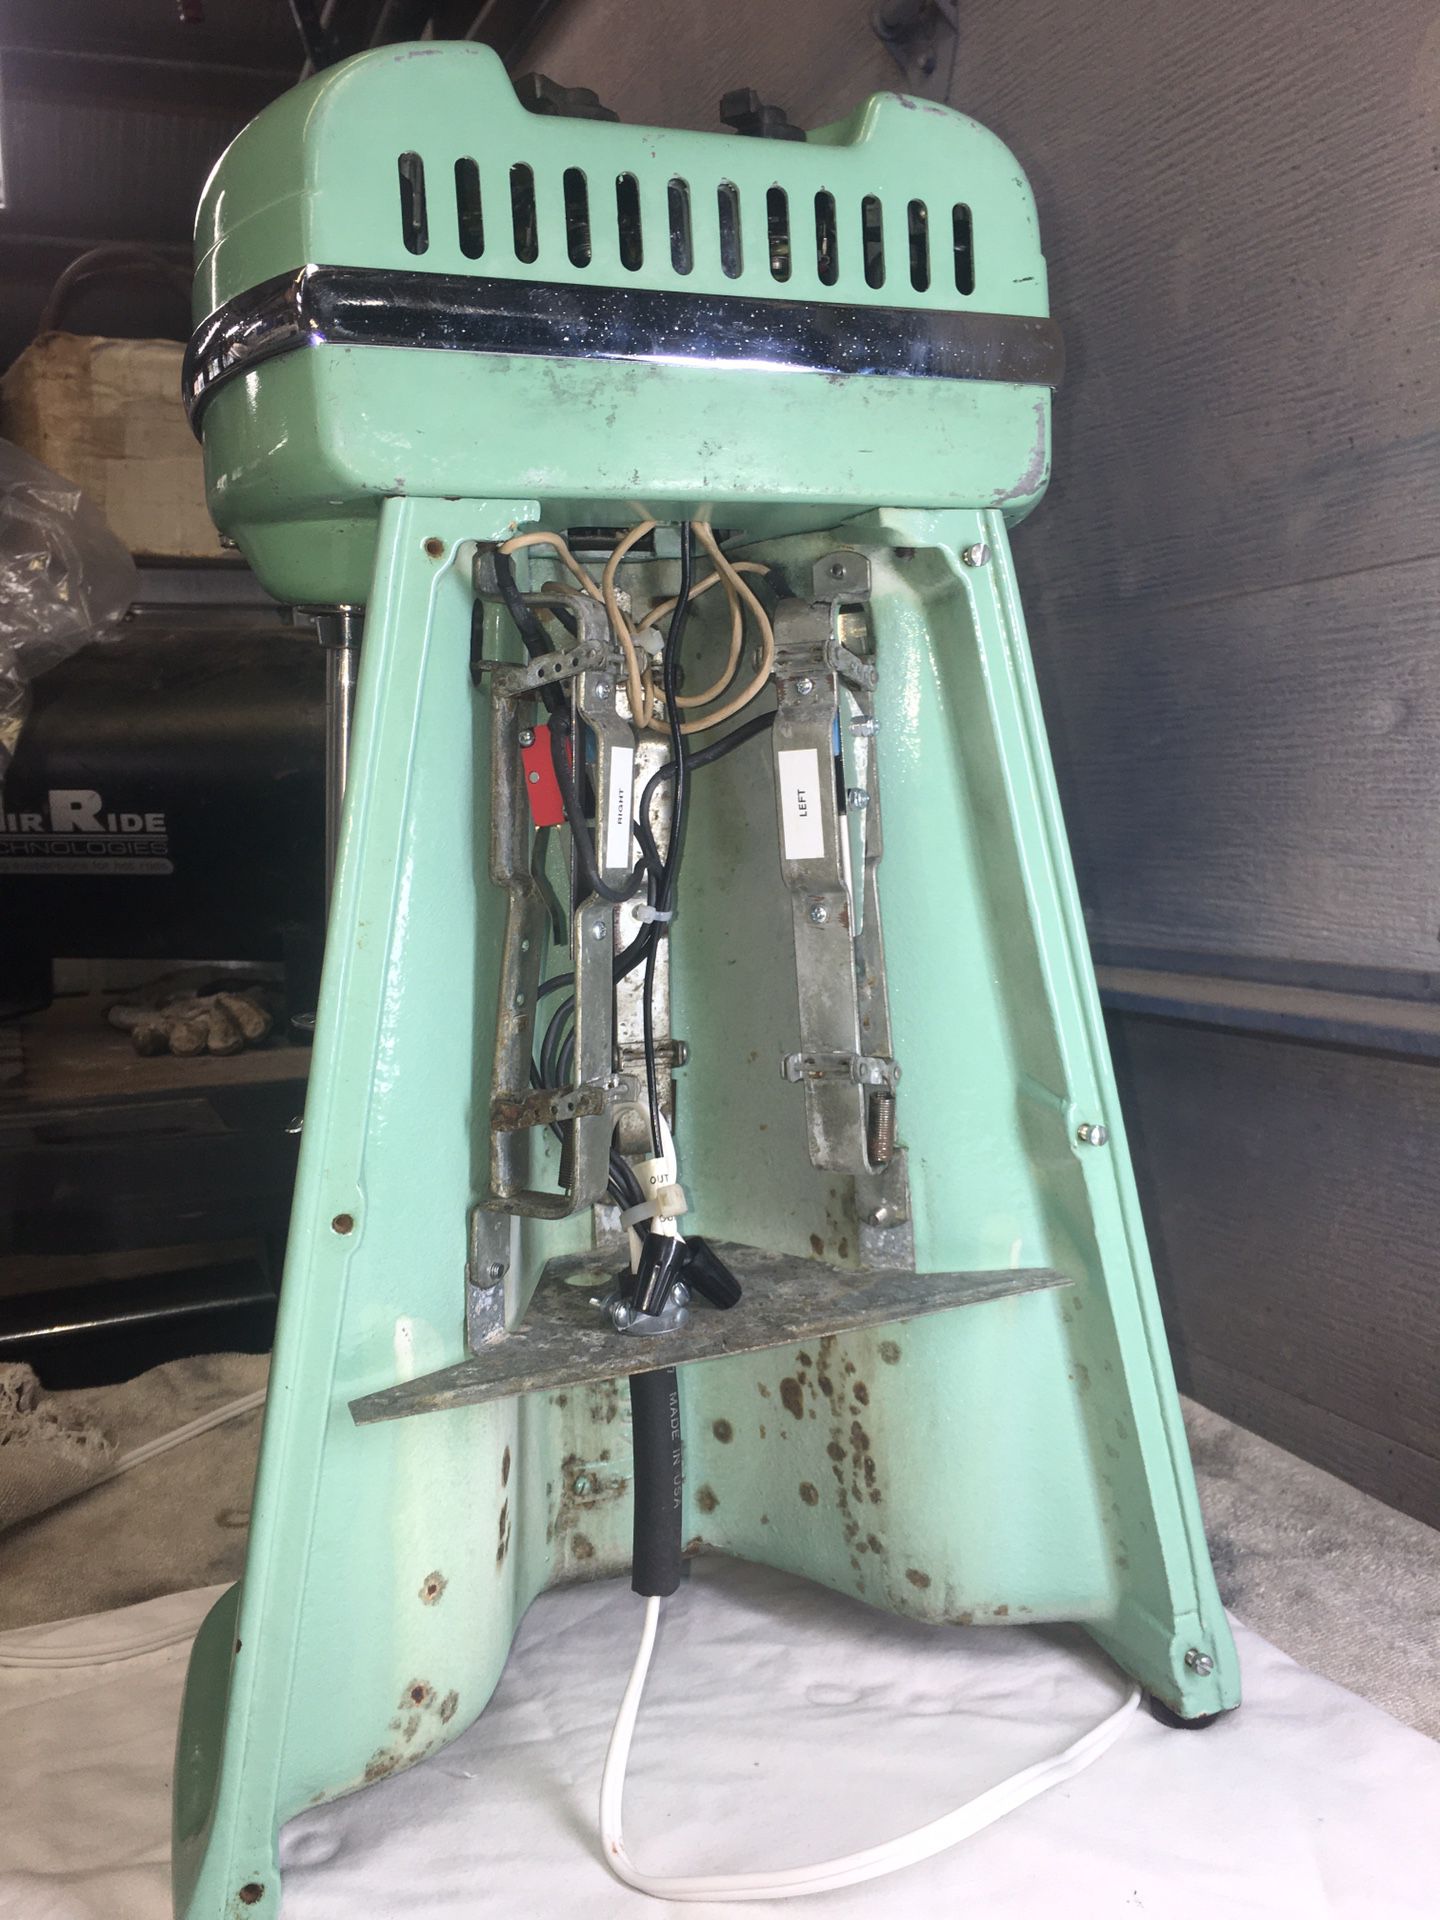 Vintage Oster Jadeite Commercial Size Milkshake Mixer for Sale in Rancho  Cucamonga, CA - OfferUp